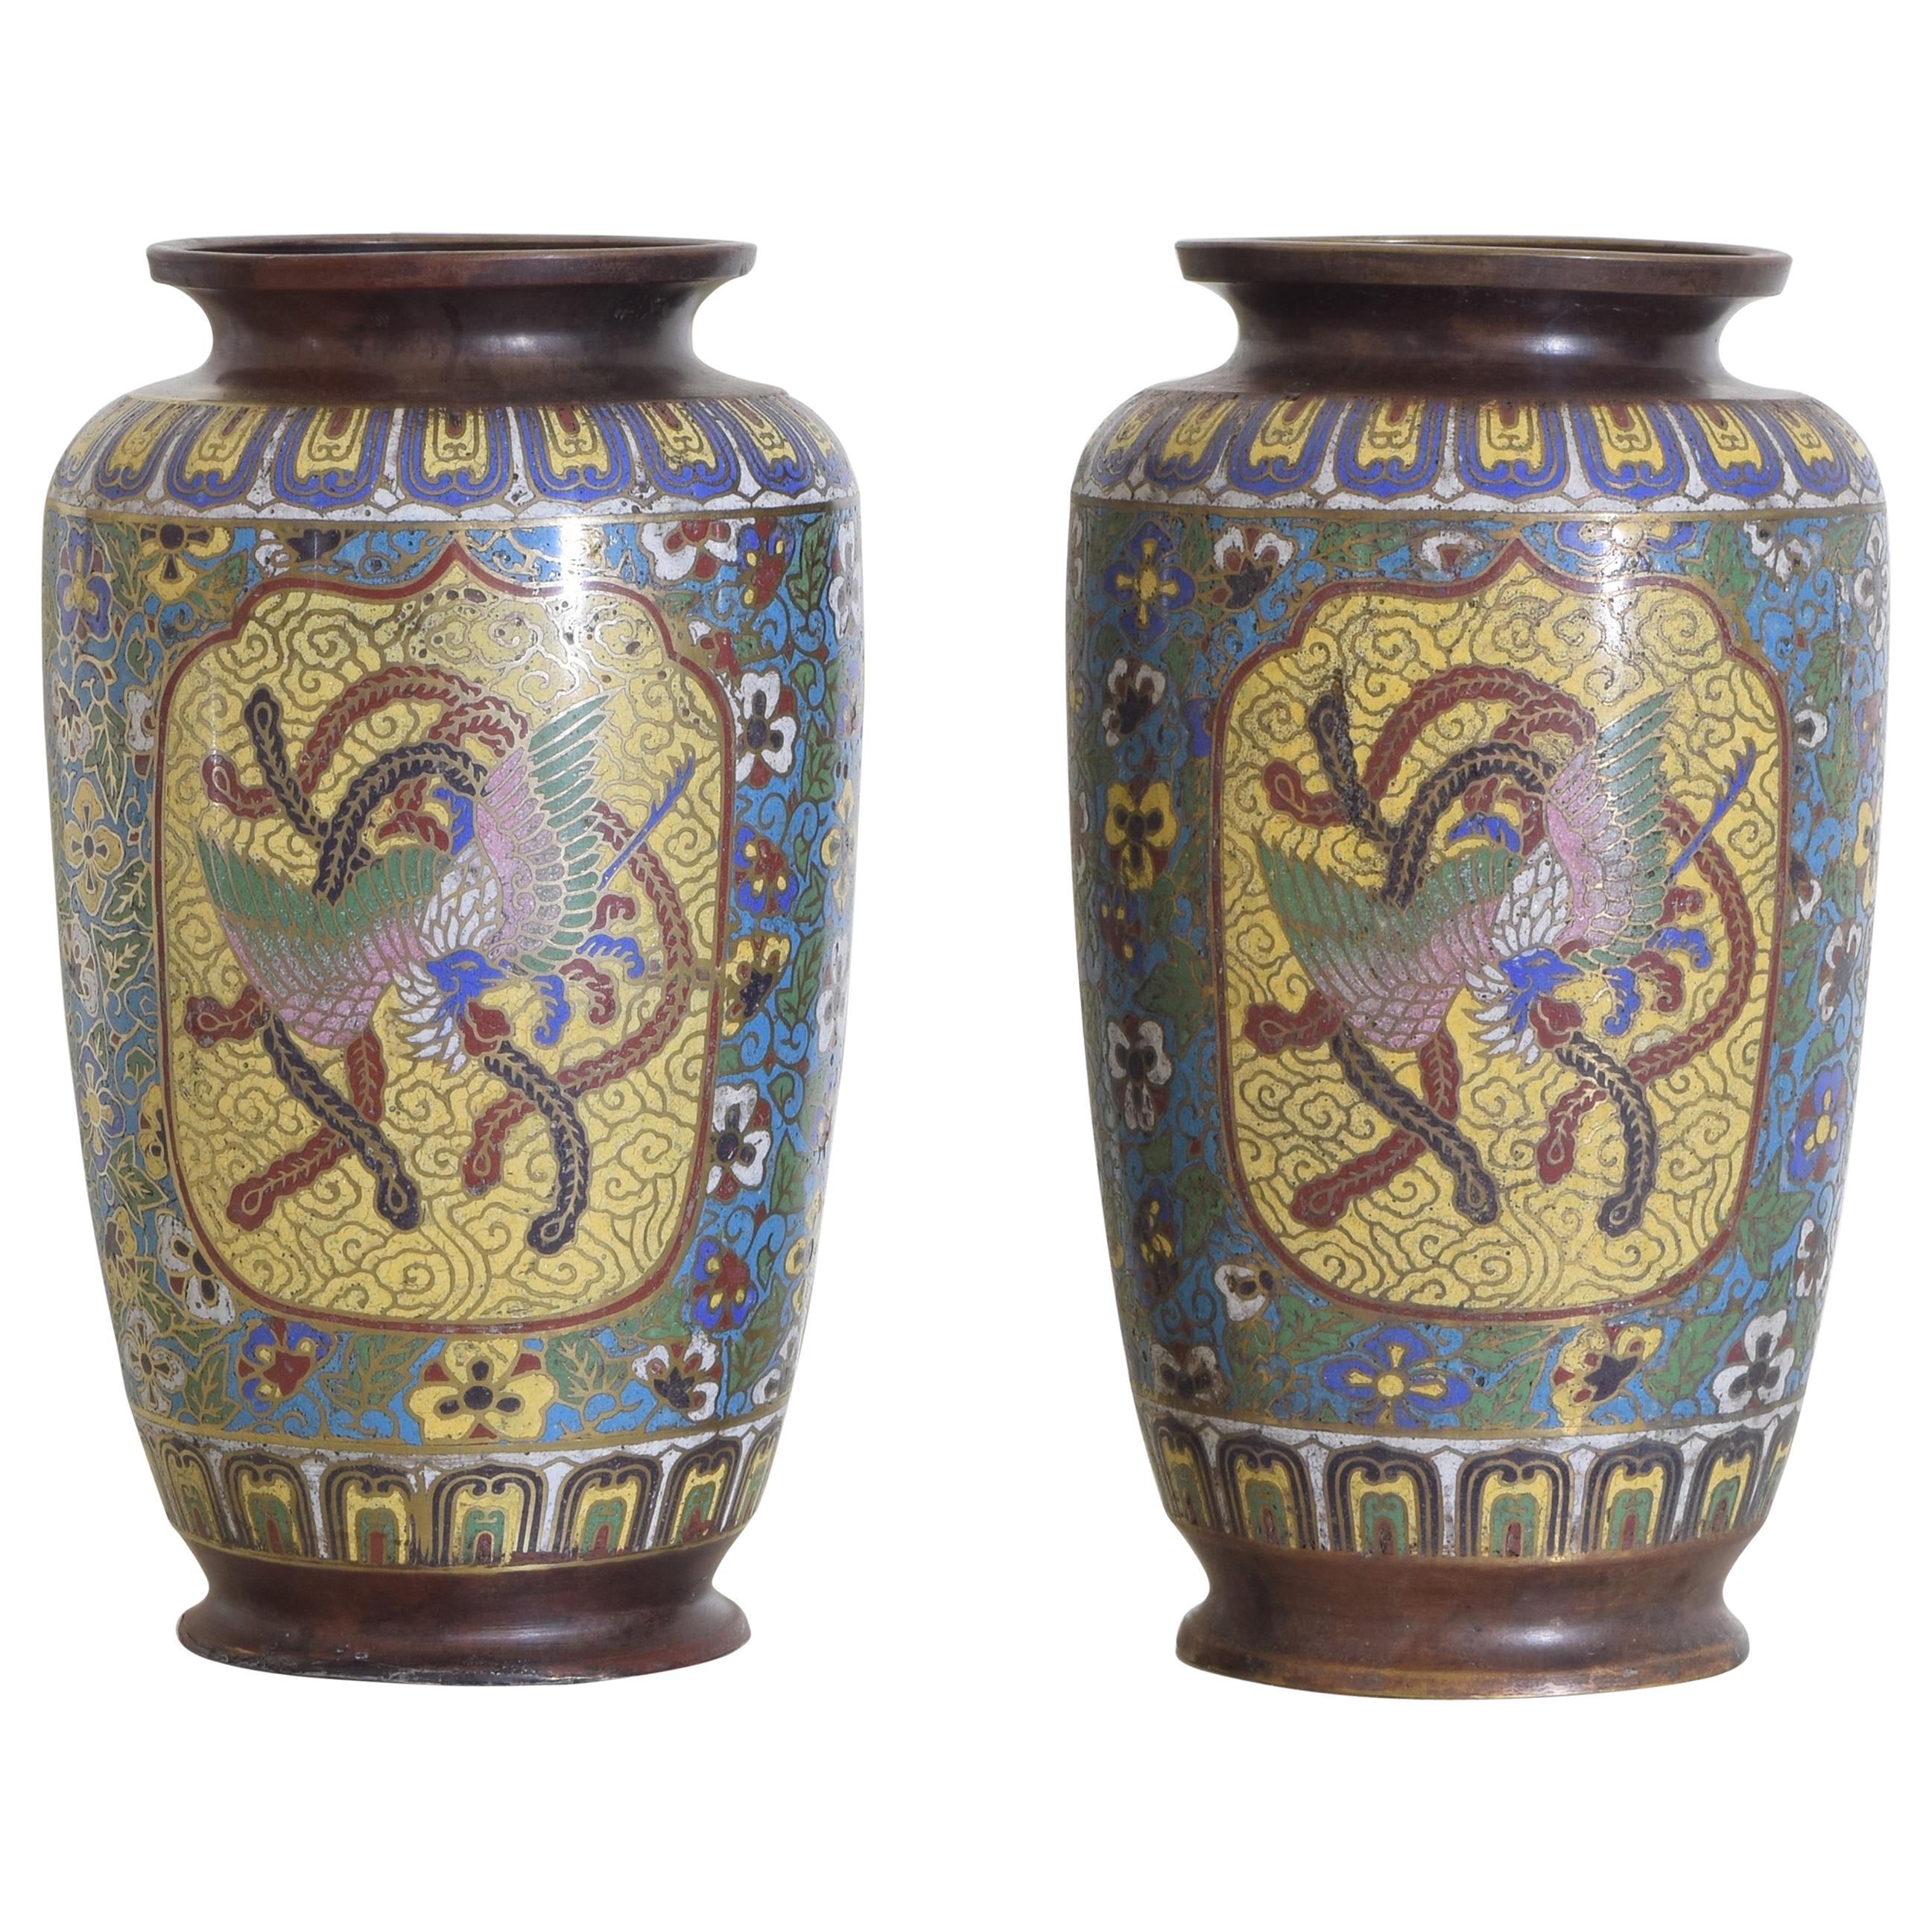 Pair of Cloisonné Multicolored Vases with Birds, Flowers, and Serpents